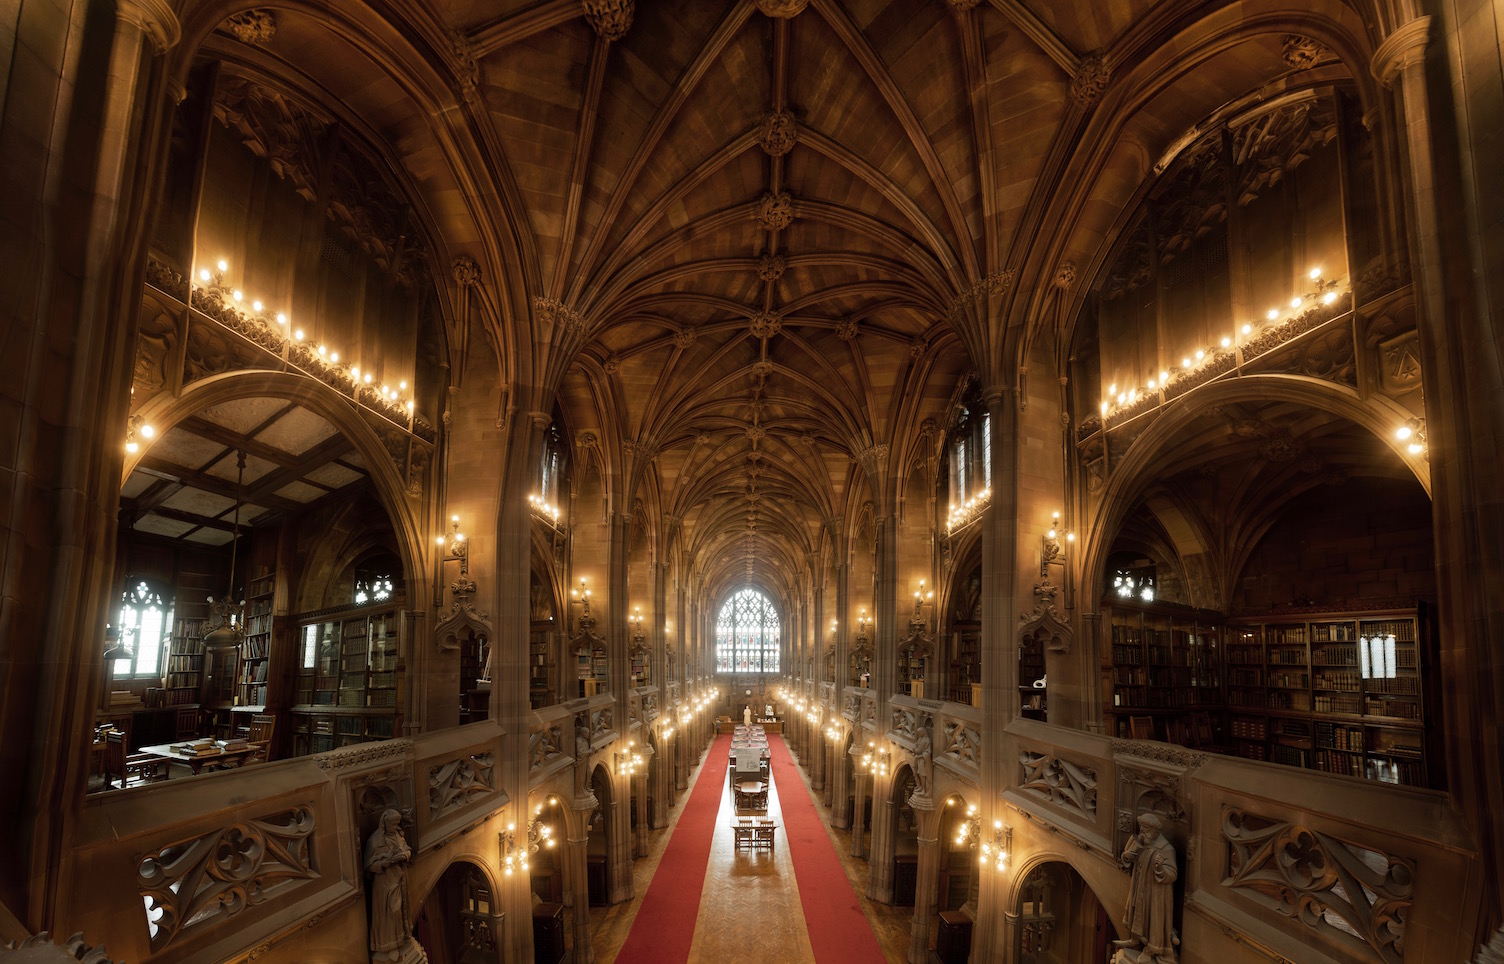 Magic bowls event. Image shows The historic Reading Room in John Rylands Library